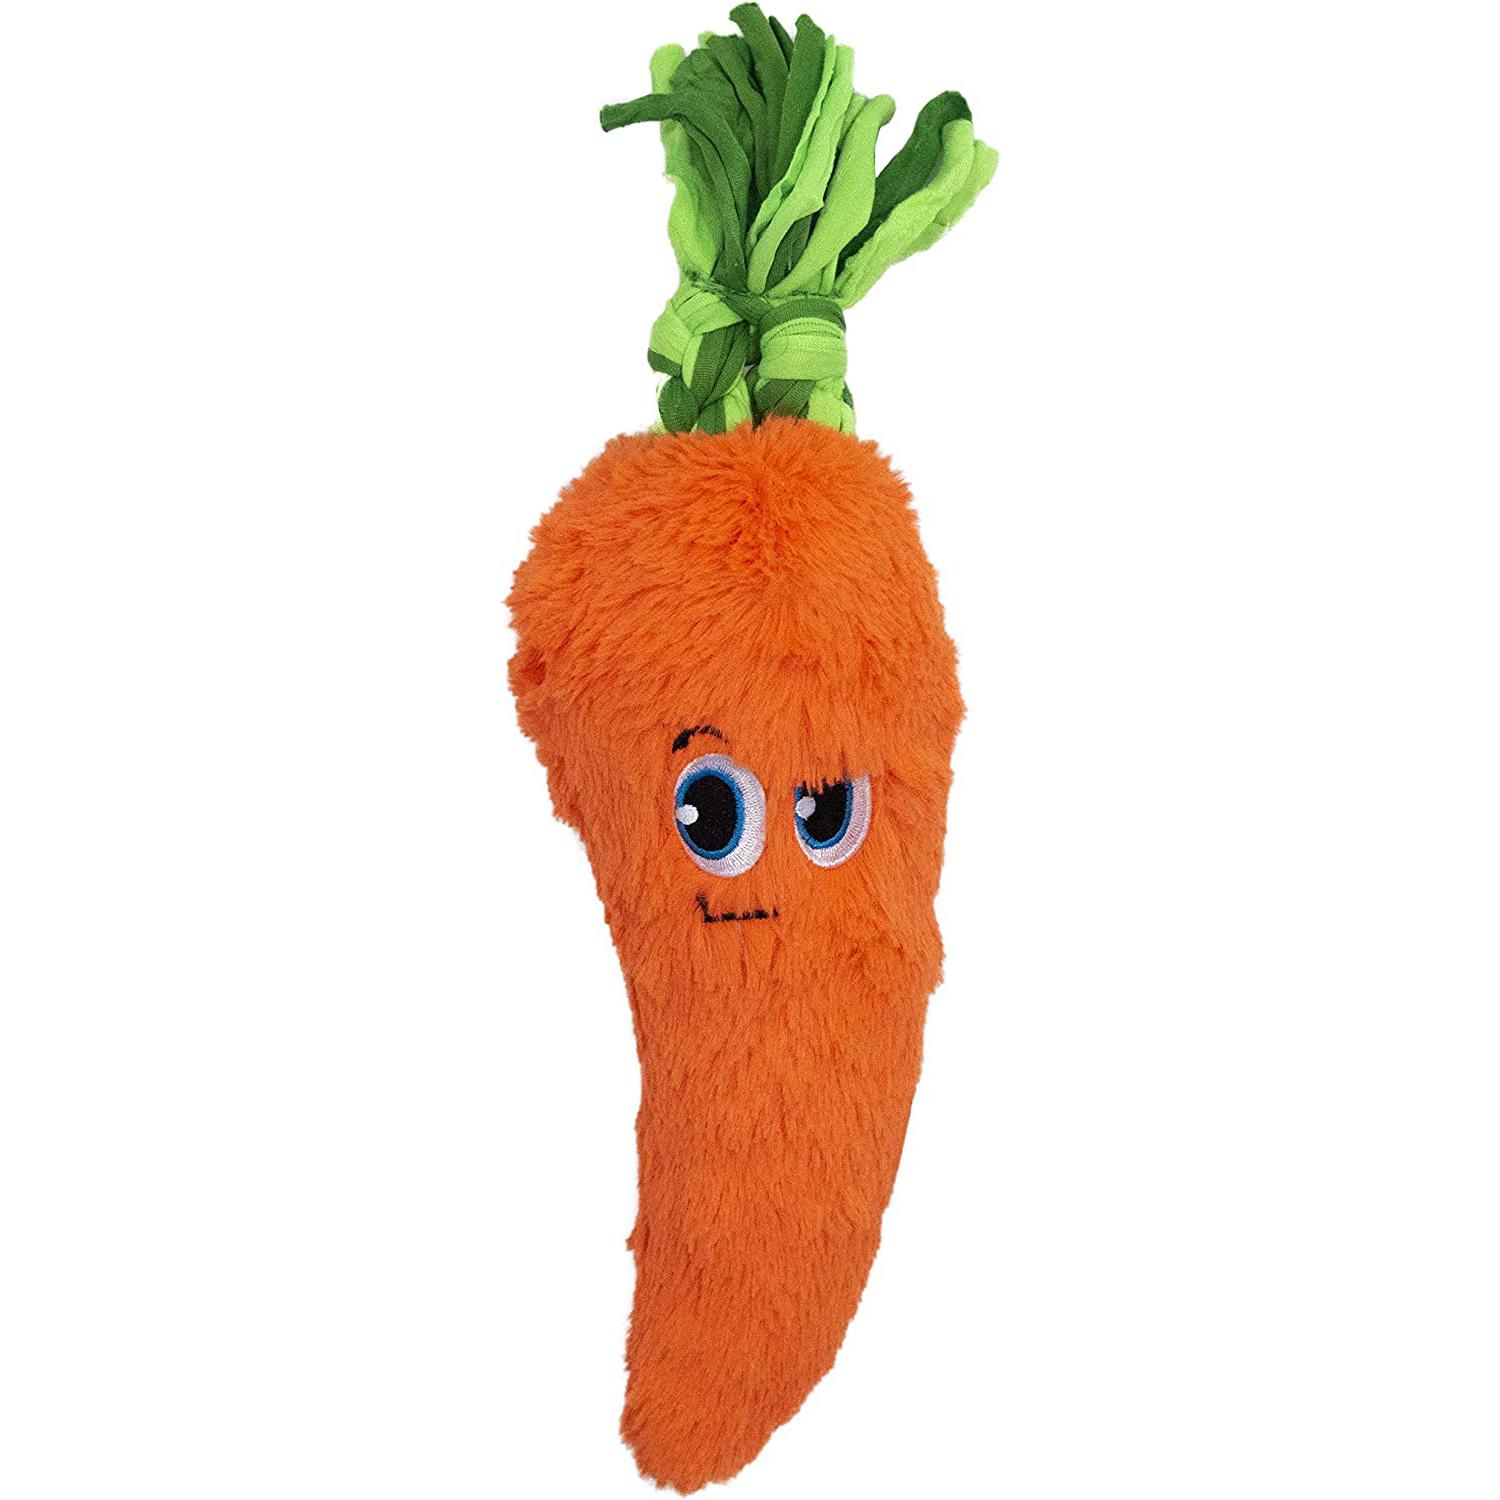 Carrot Plush Squeaky Dog Toy for $5